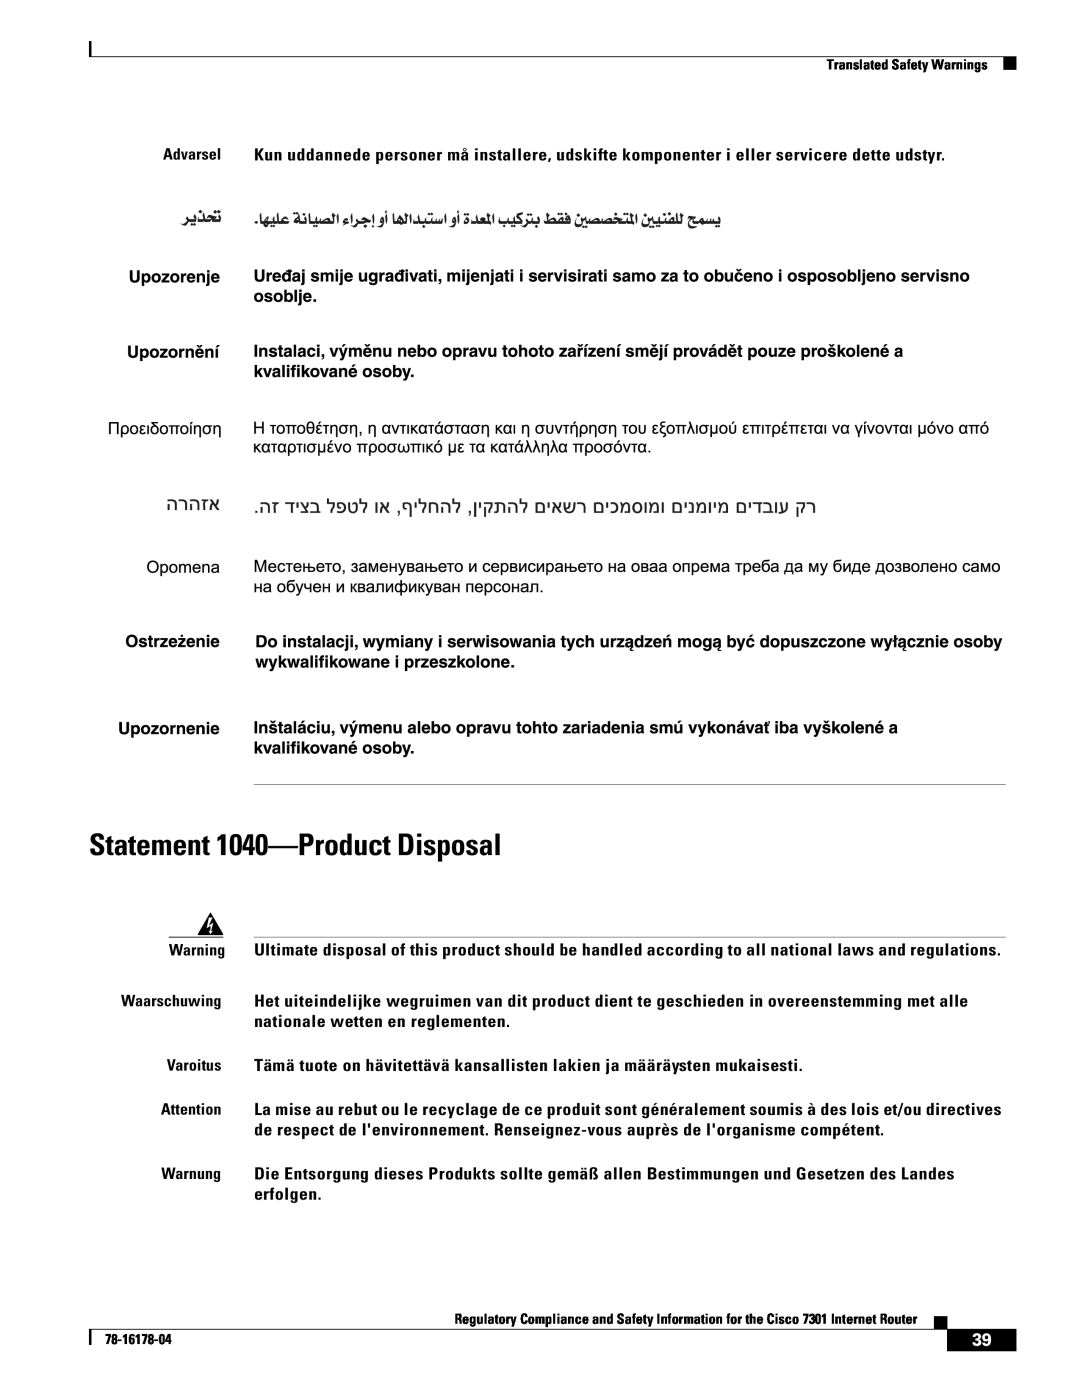 Cisco Systems CISCO7301 manual Statement 1040-Product Disposal 